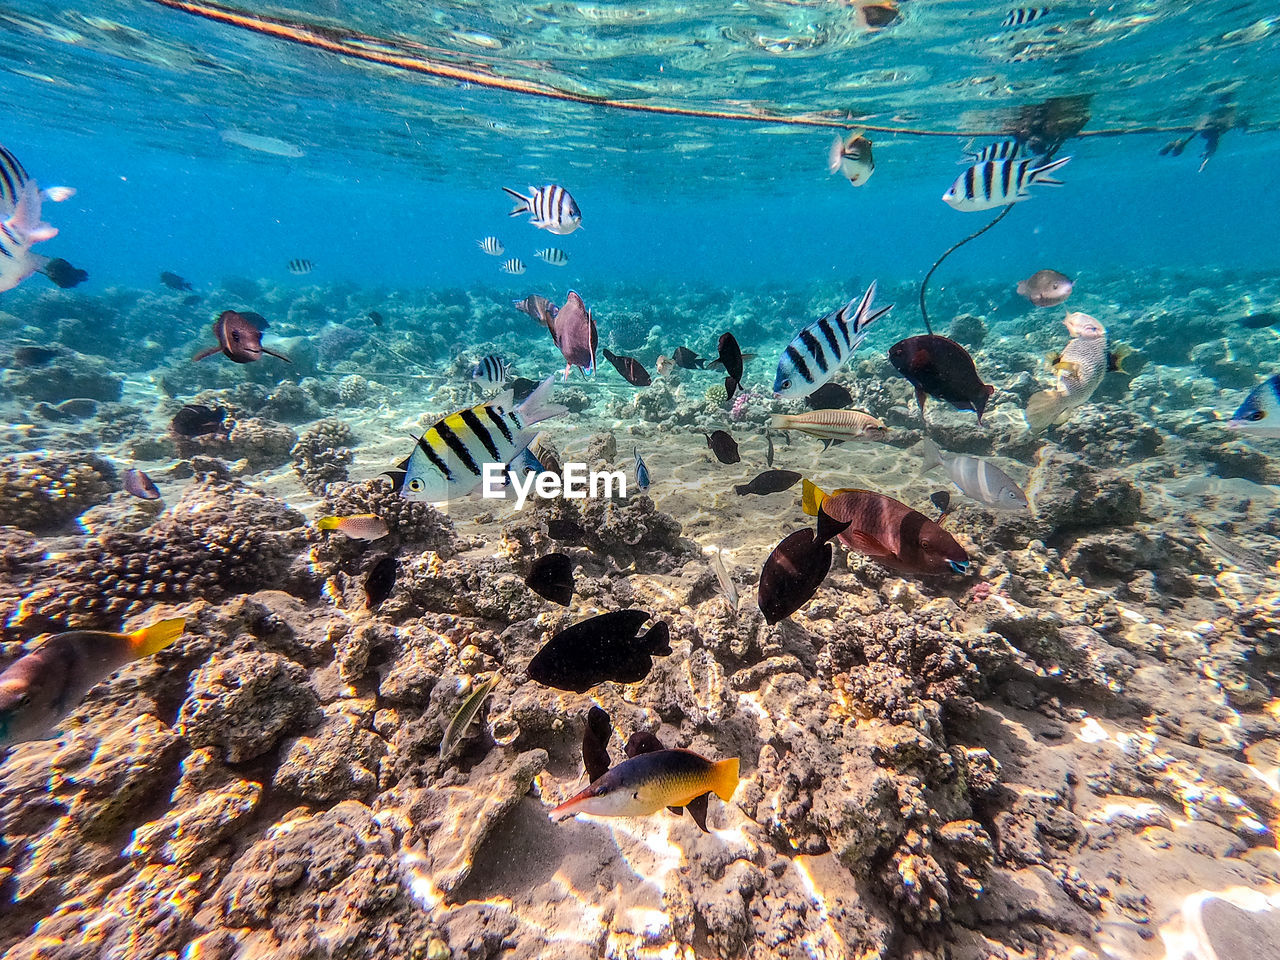 sea, water, underwater, undersea, animal, wildlife, sea life, animal themes, animal wildlife, coral reef, fish, marine, reef, swimming, group of animals, nature, coral, large group of animals, marine biology, aquarium, coral reef fish, sports, water sports, beauty in nature, natural environment, ocean, tropical fish, scuba diving, adventure, sunlight, school of fish, outdoors, tropical climate